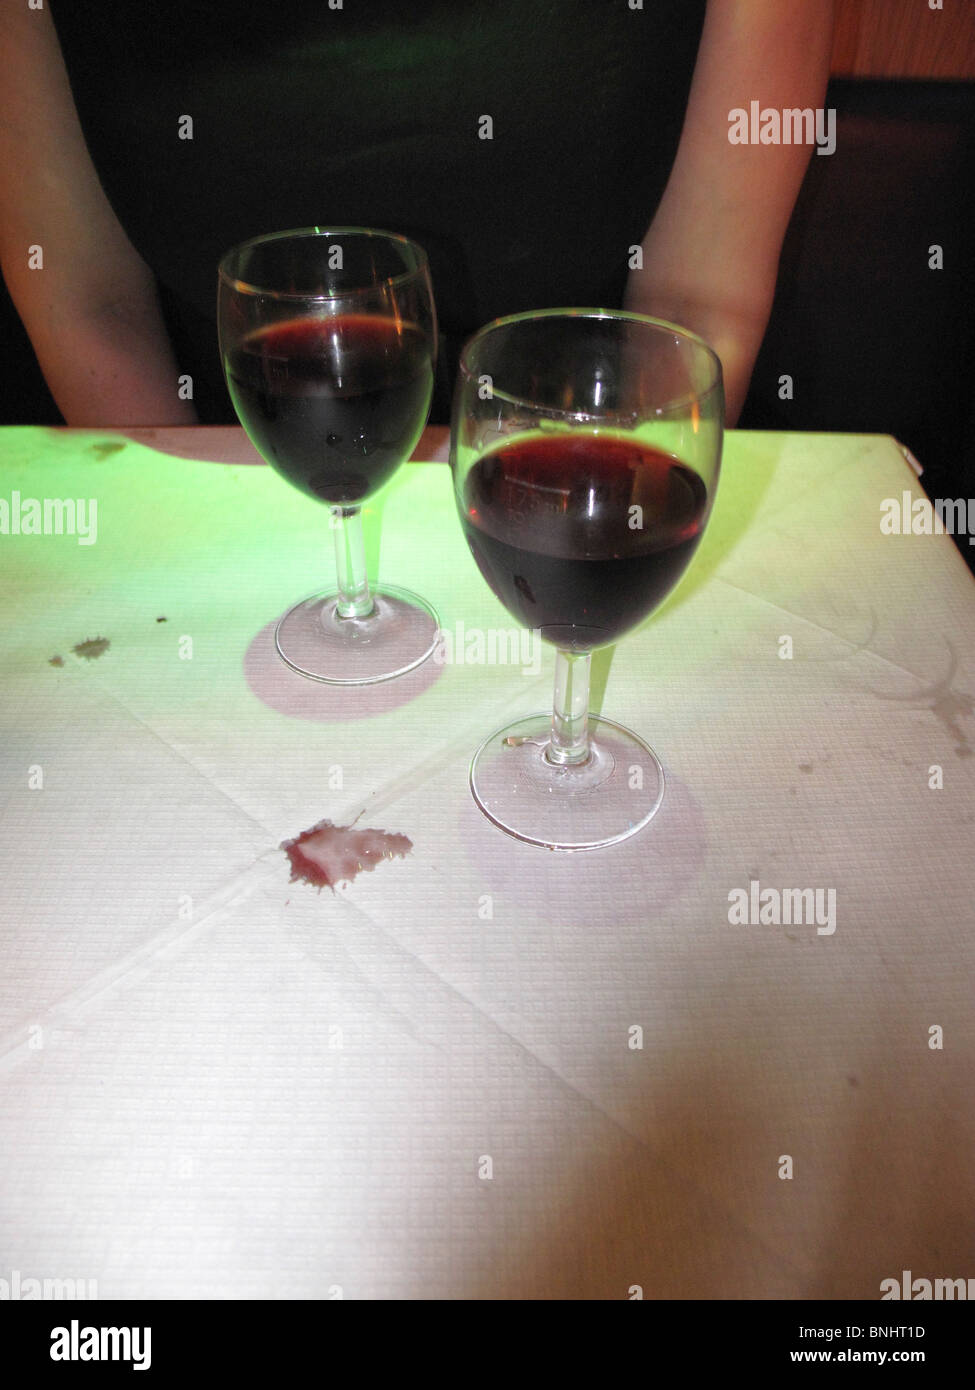 Two glasses of red wine on restaurant table with wine stain on paper table cloth Stock Photo